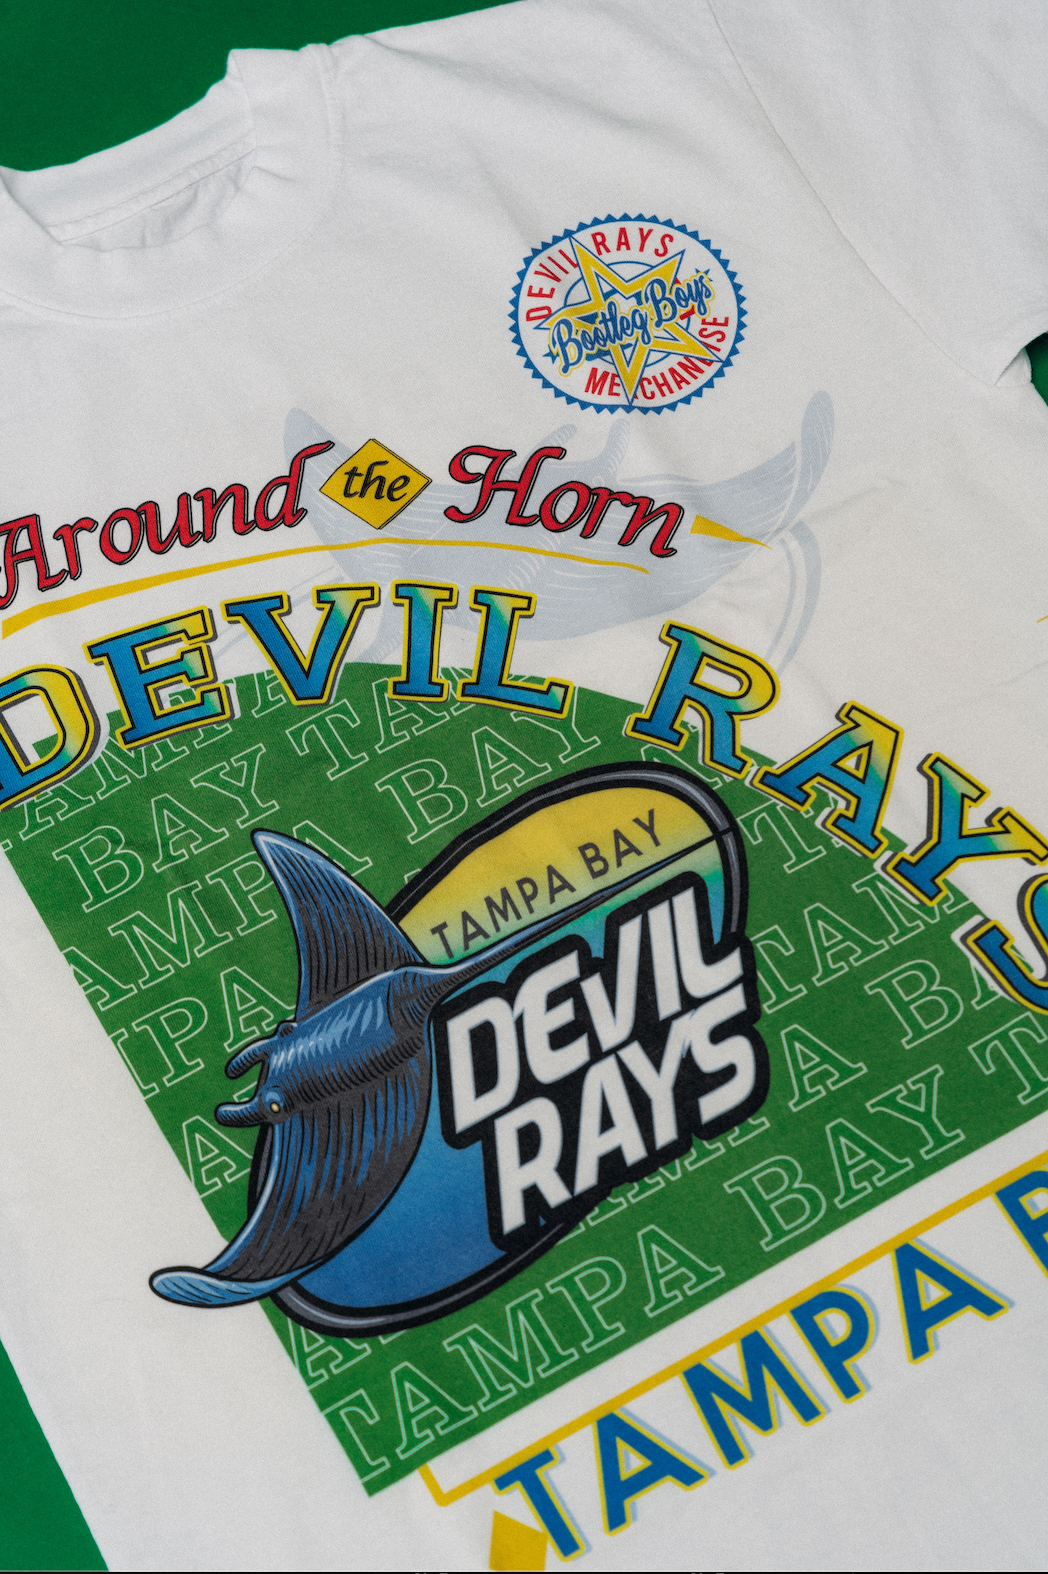 Greatest Devil Rays Tee Of All Time